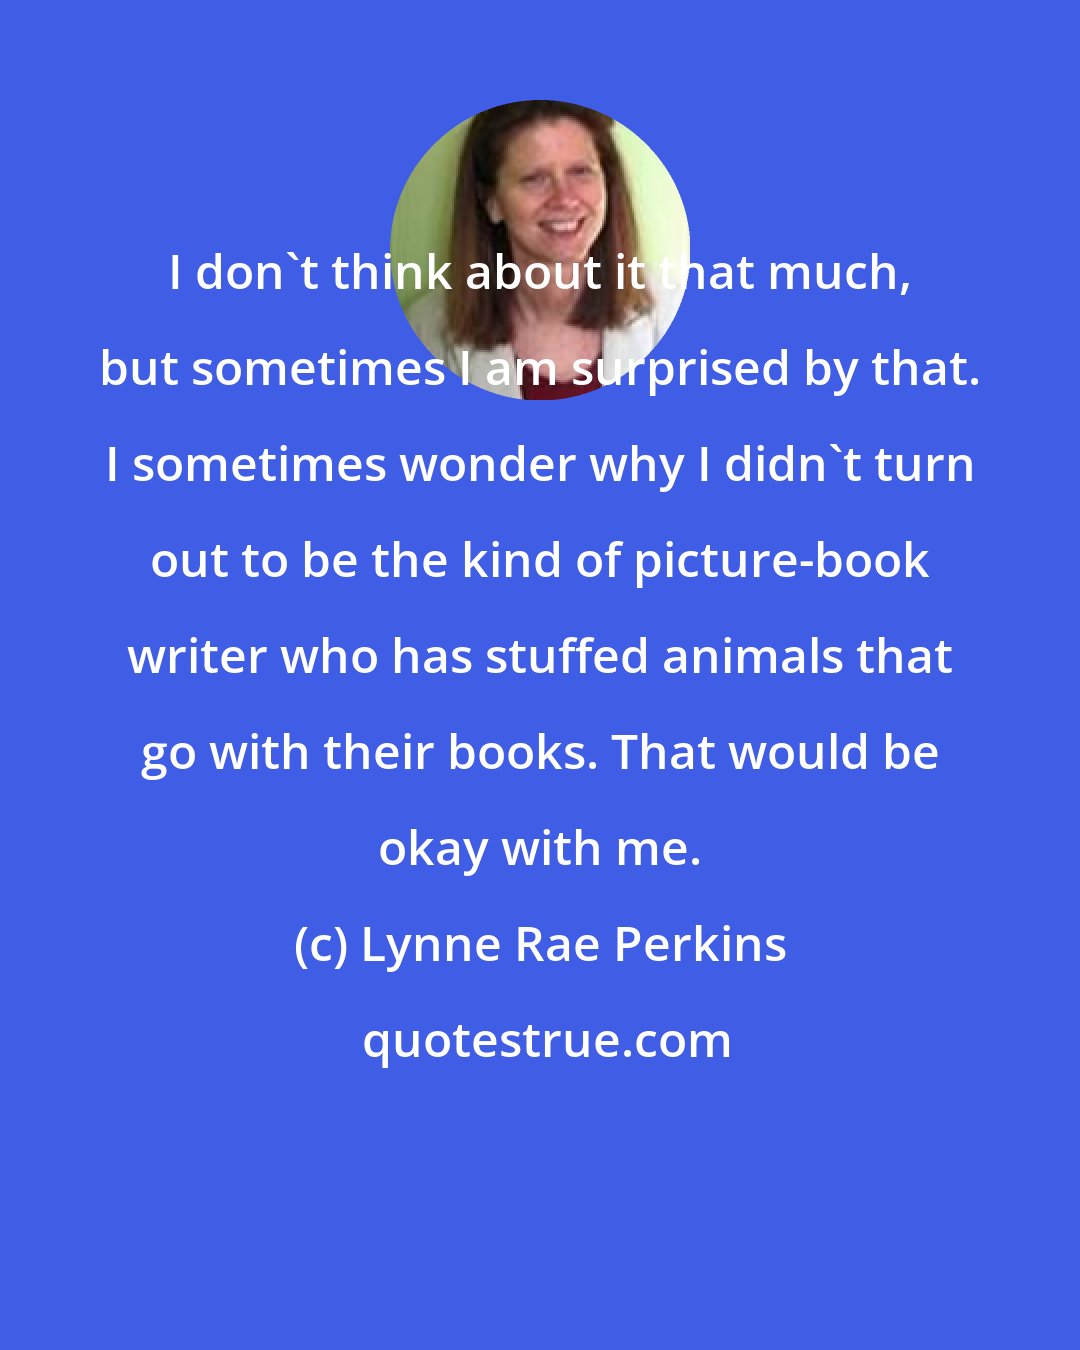 Lynne Rae Perkins: I don't think about it that much, but sometimes I am surprised by that. I sometimes wonder why I didn't turn out to be the kind of picture-book writer who has stuffed animals that go with their books. That would be okay with me.